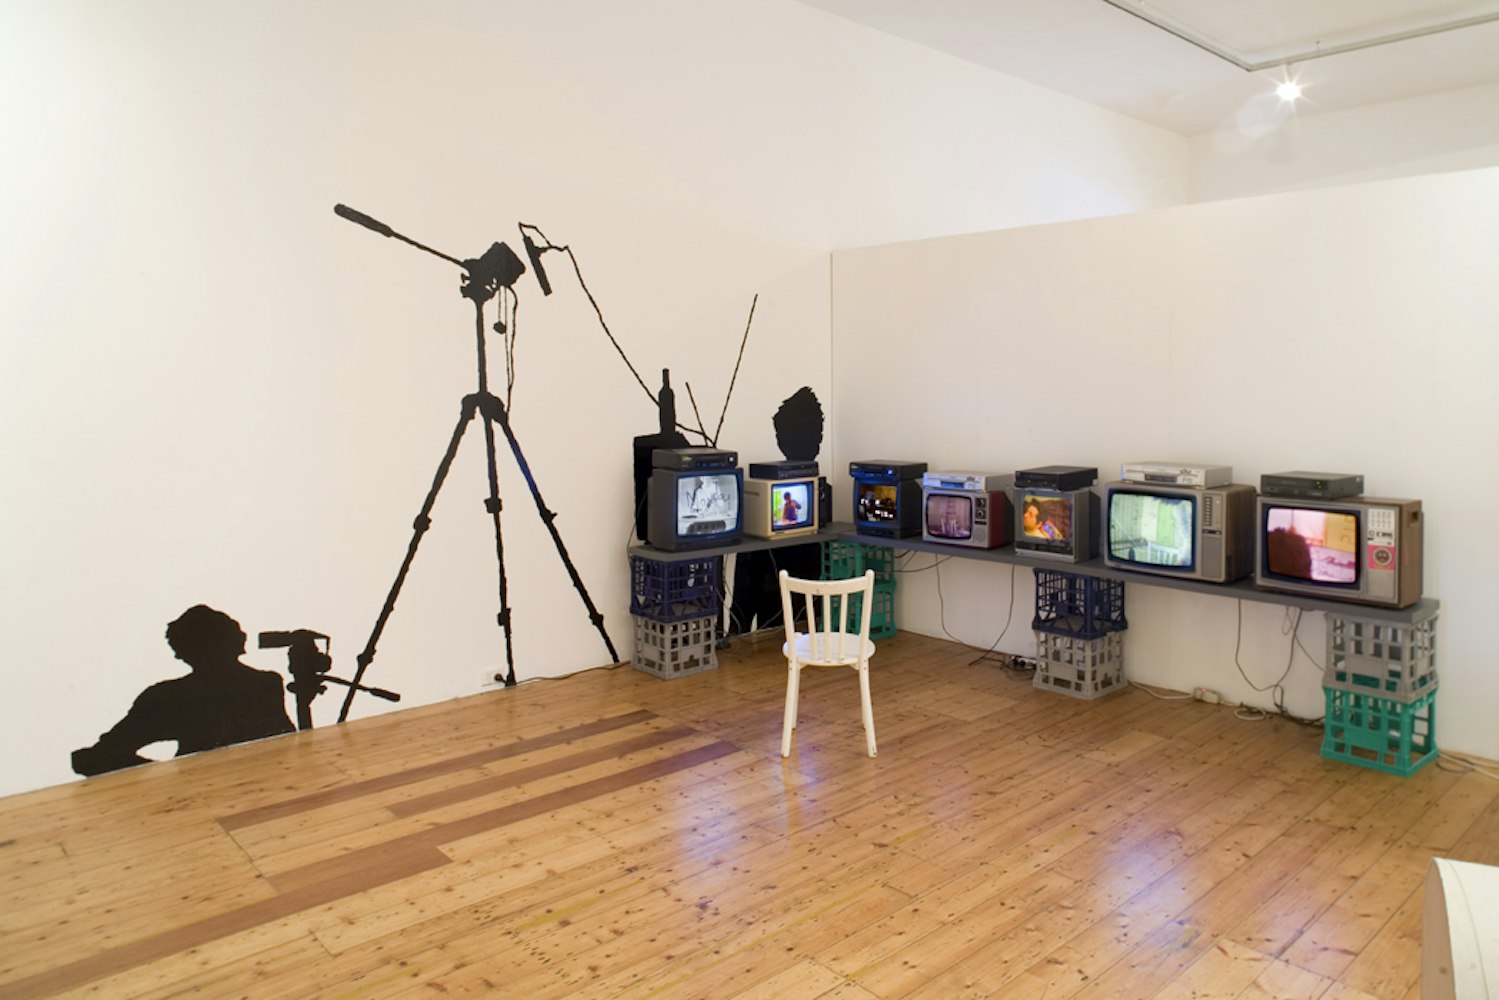 Installation view of 'We Are Hidden And We Can See You, We Are Hidden And You Can See Us' at 200 Gertrude Street 